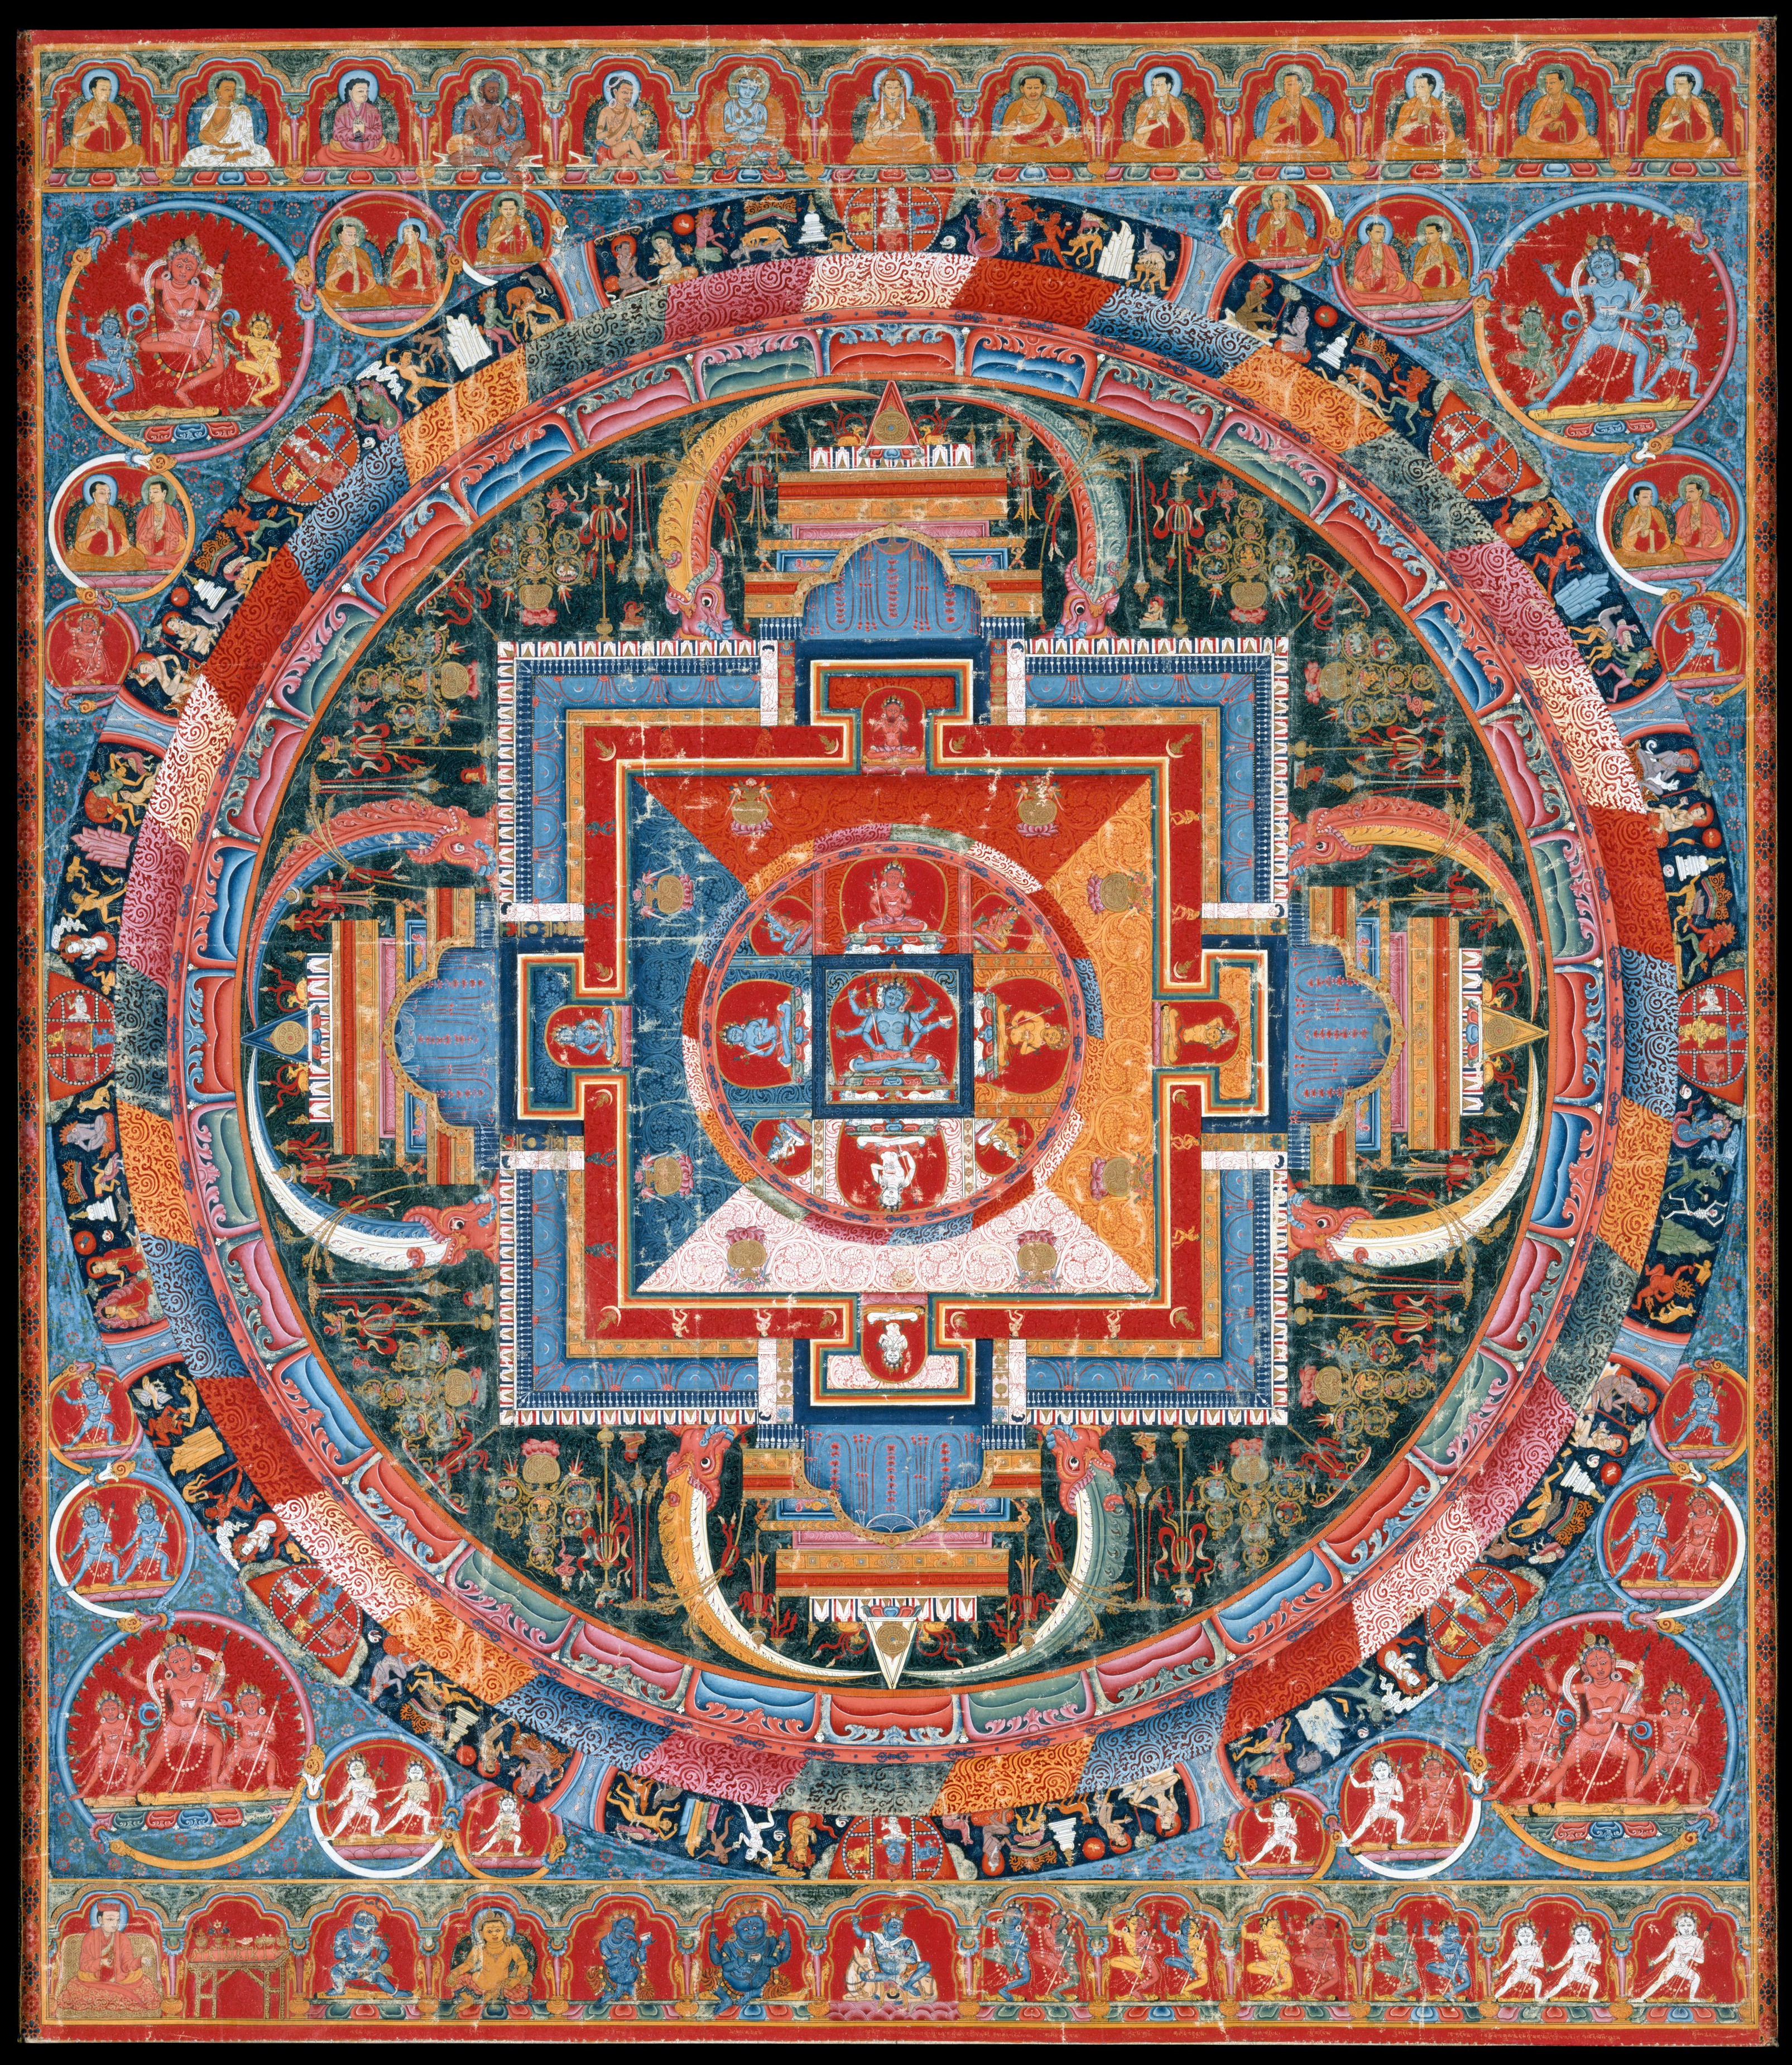 Mandala of Jnanadakini by Unknown Artist - late 14th century - 74.9 x 83.8 cm private collection